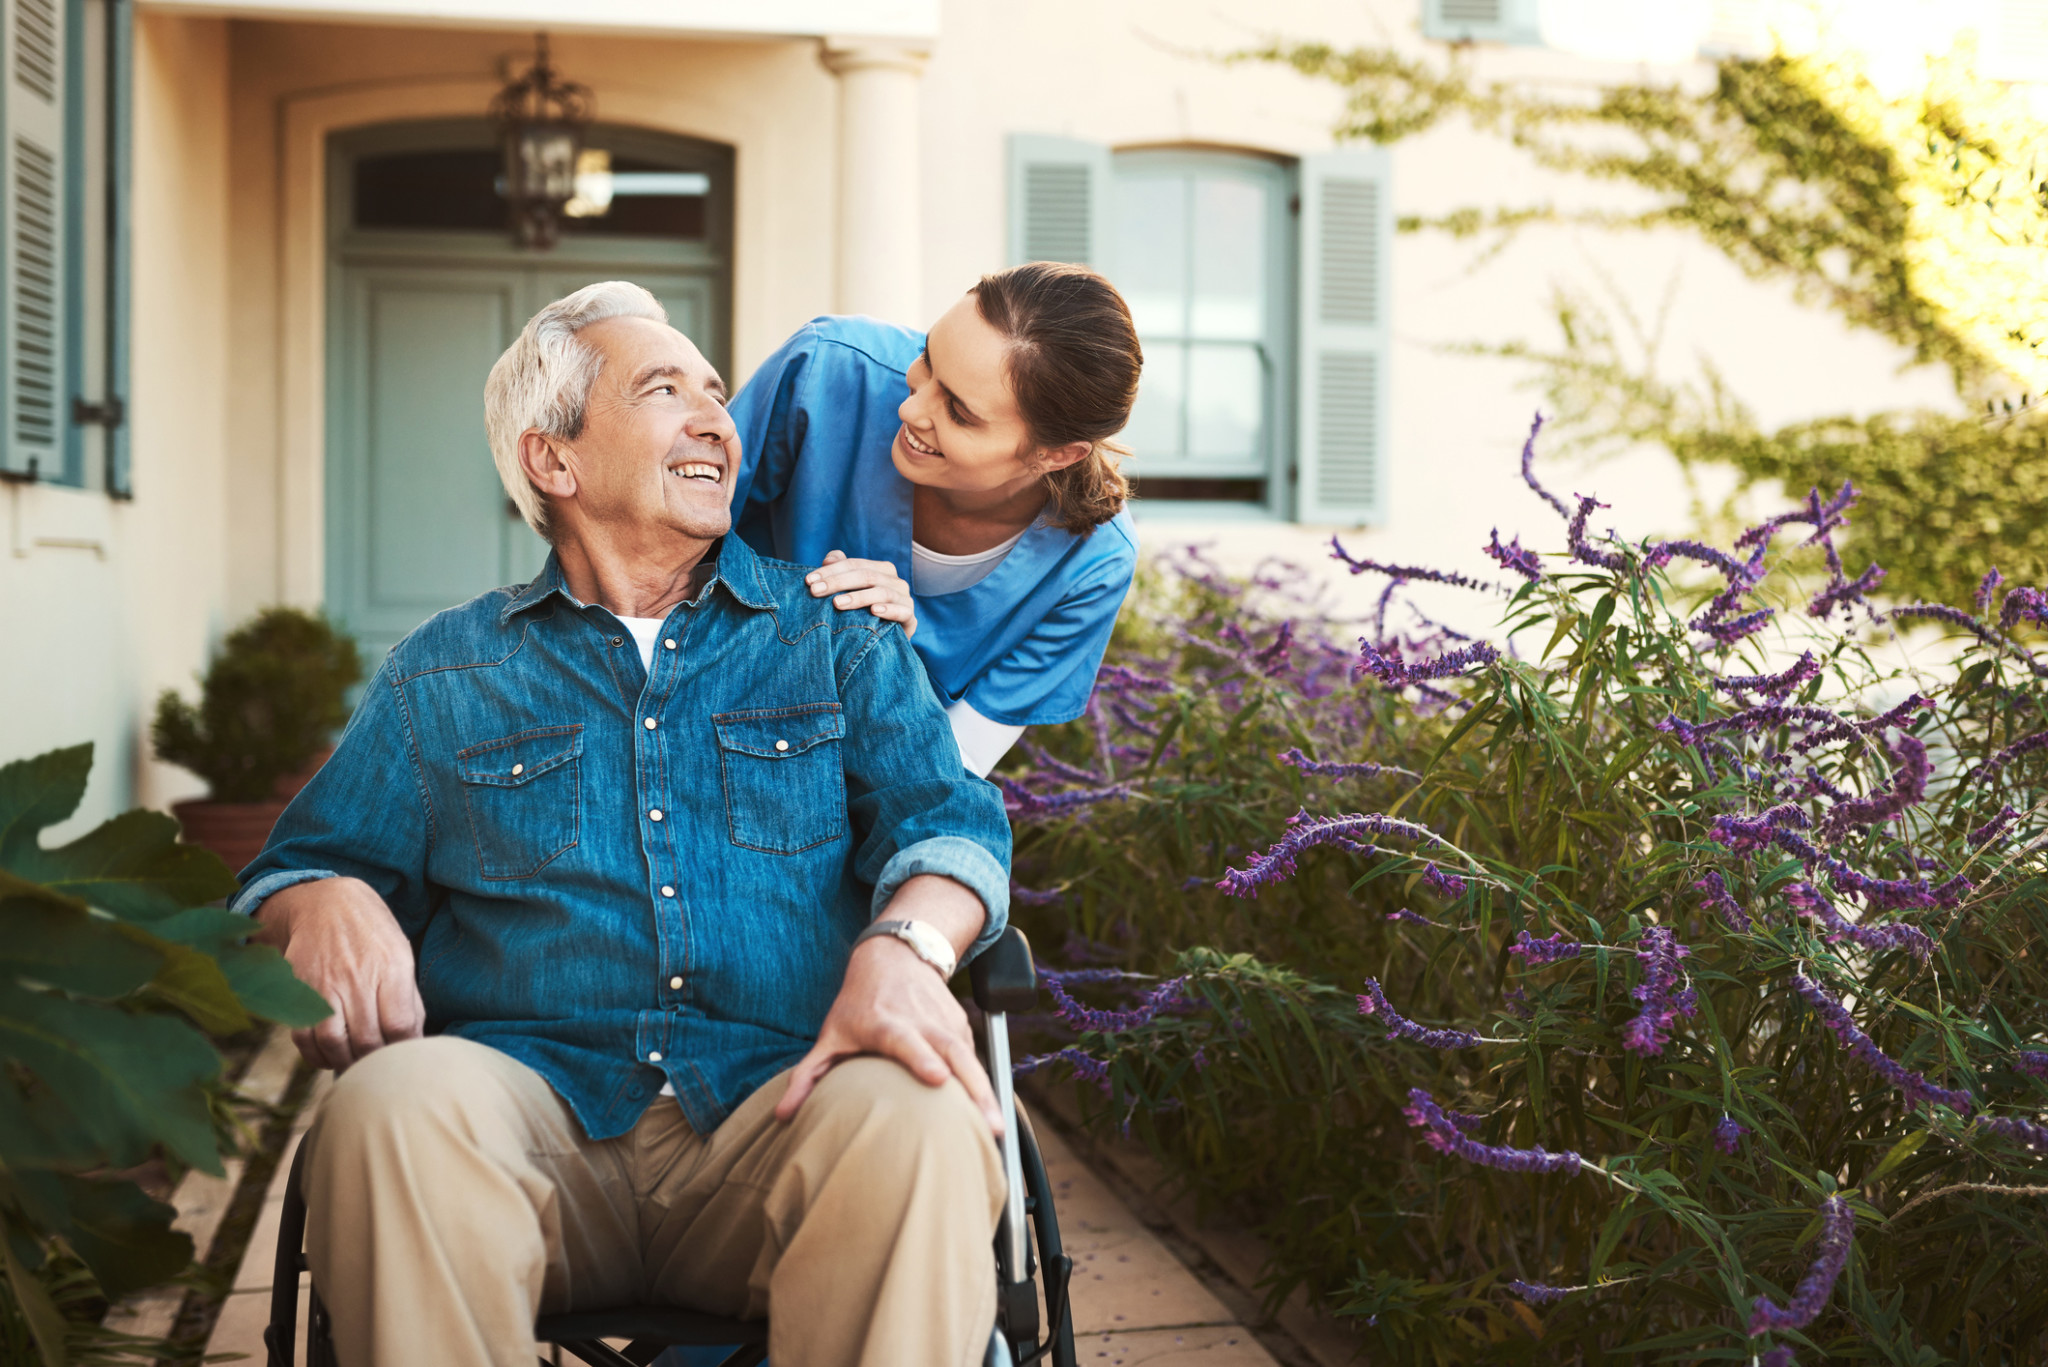 Nurse outside with a senior patient in wheelchair | Assisted living communities insurance